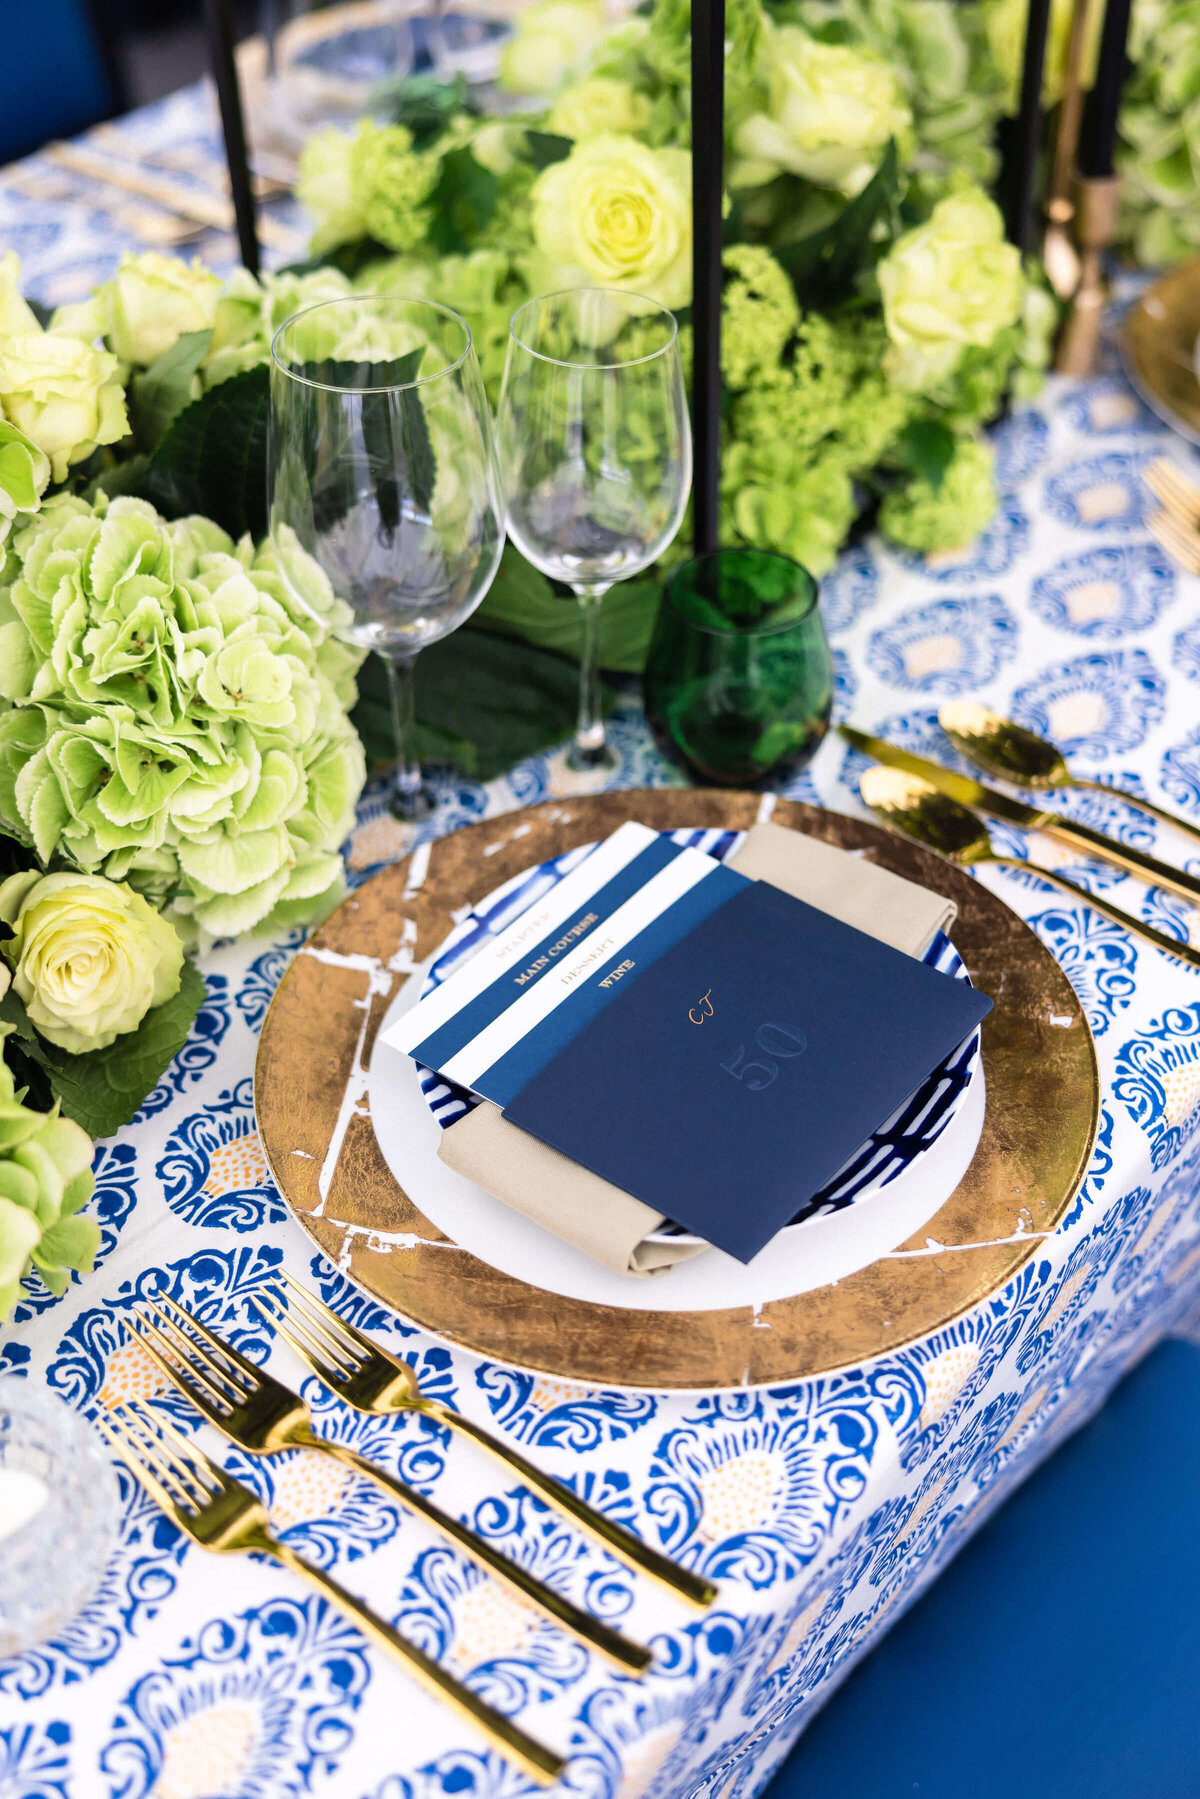 lime green flowers along the centre of a dinner table laid with blue patterned linen and gold charger plates topped with a blue menu for a birthday party